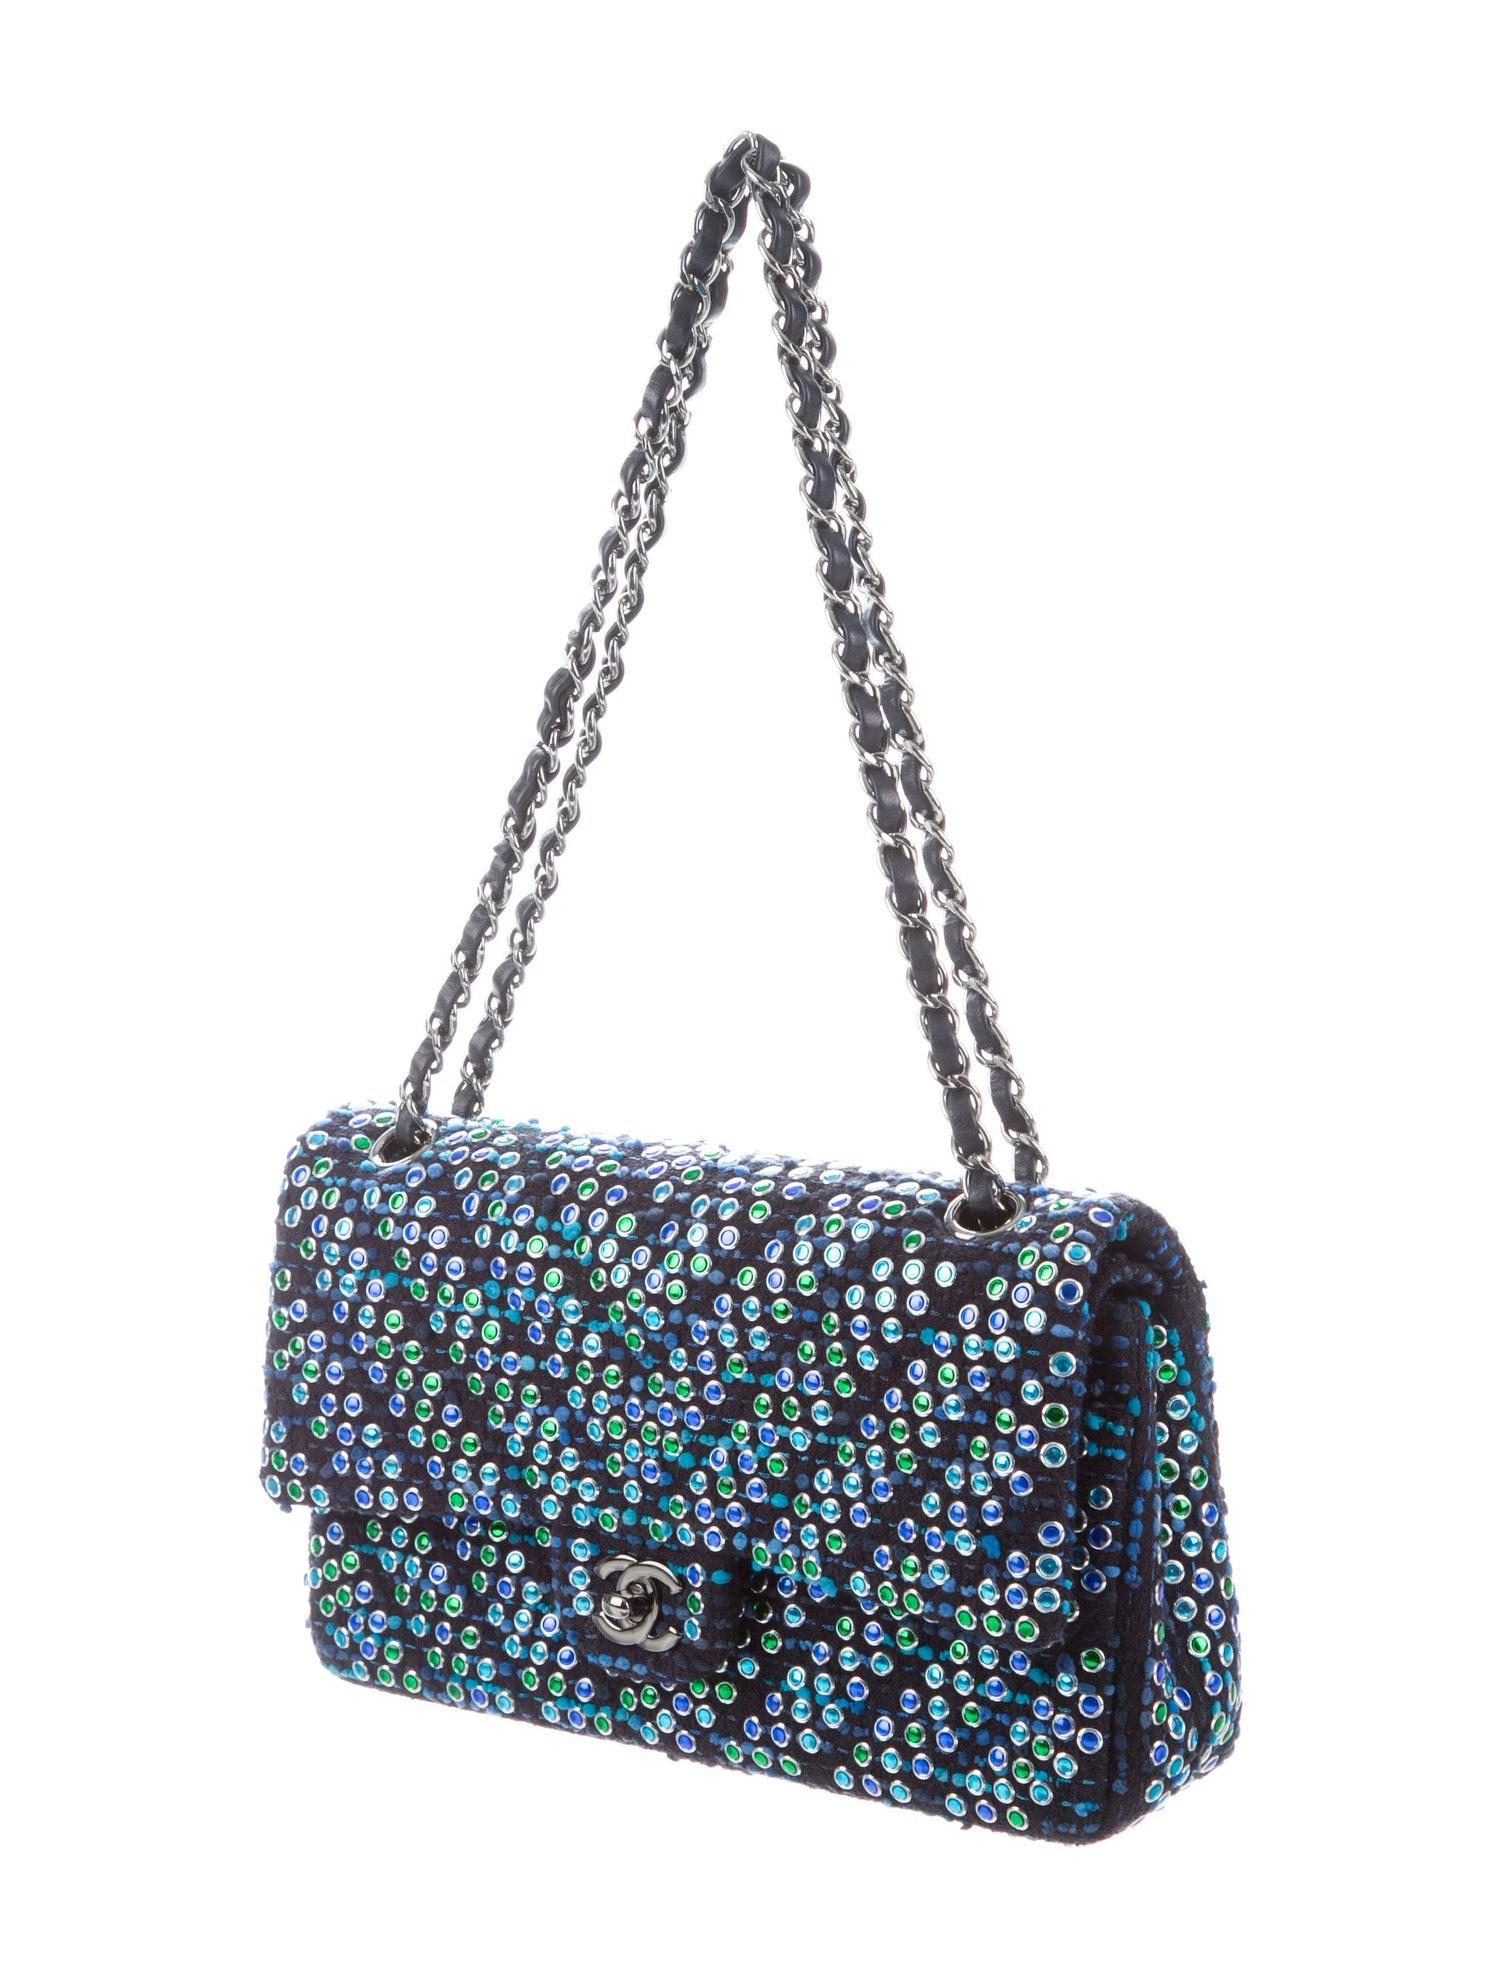 Chanel Boucle Blue Green Resin Silver Evening Shoulder Bag in Box 

Bouclé 
Resin 
Leather 
Silver tone and ruthenium hardware
Leather lining
Turn-lock closure
Date code present
Made in France 
Shoulder strap drop 19